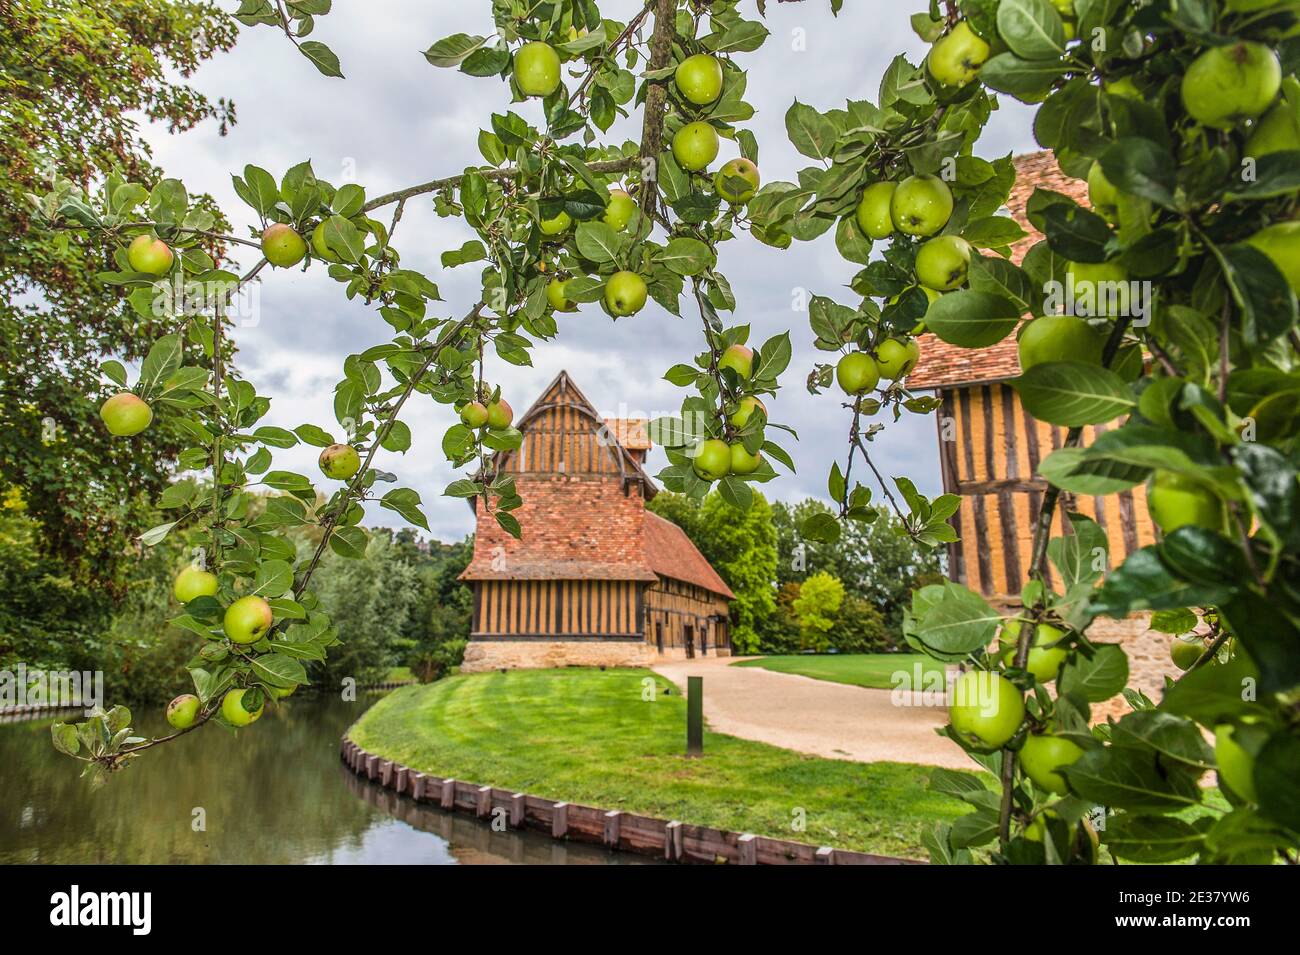 The apple orchard with old varieties at rthe Château de Crèvecoeurs, Normandy, France Stock Photo